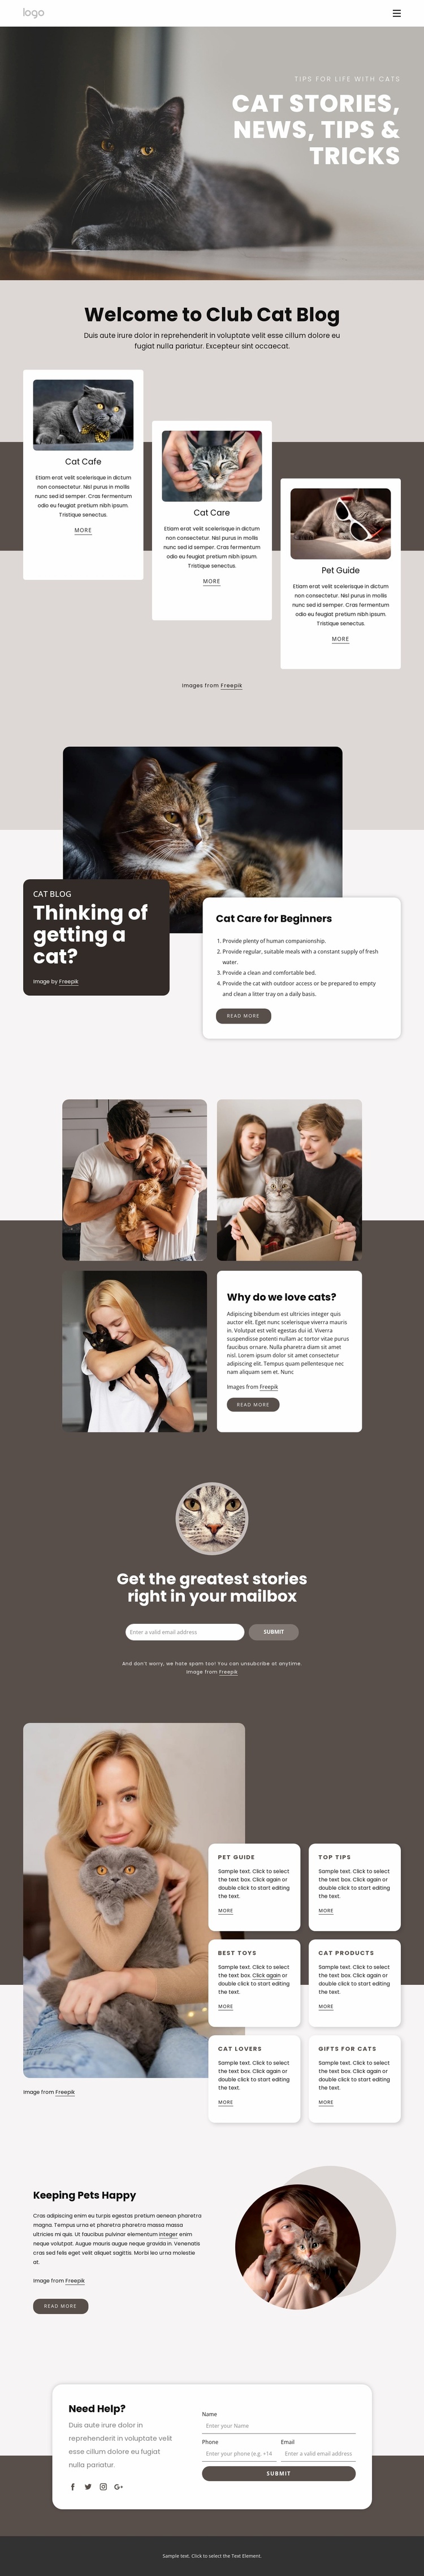 Cat stories, tips and tricks Website Template